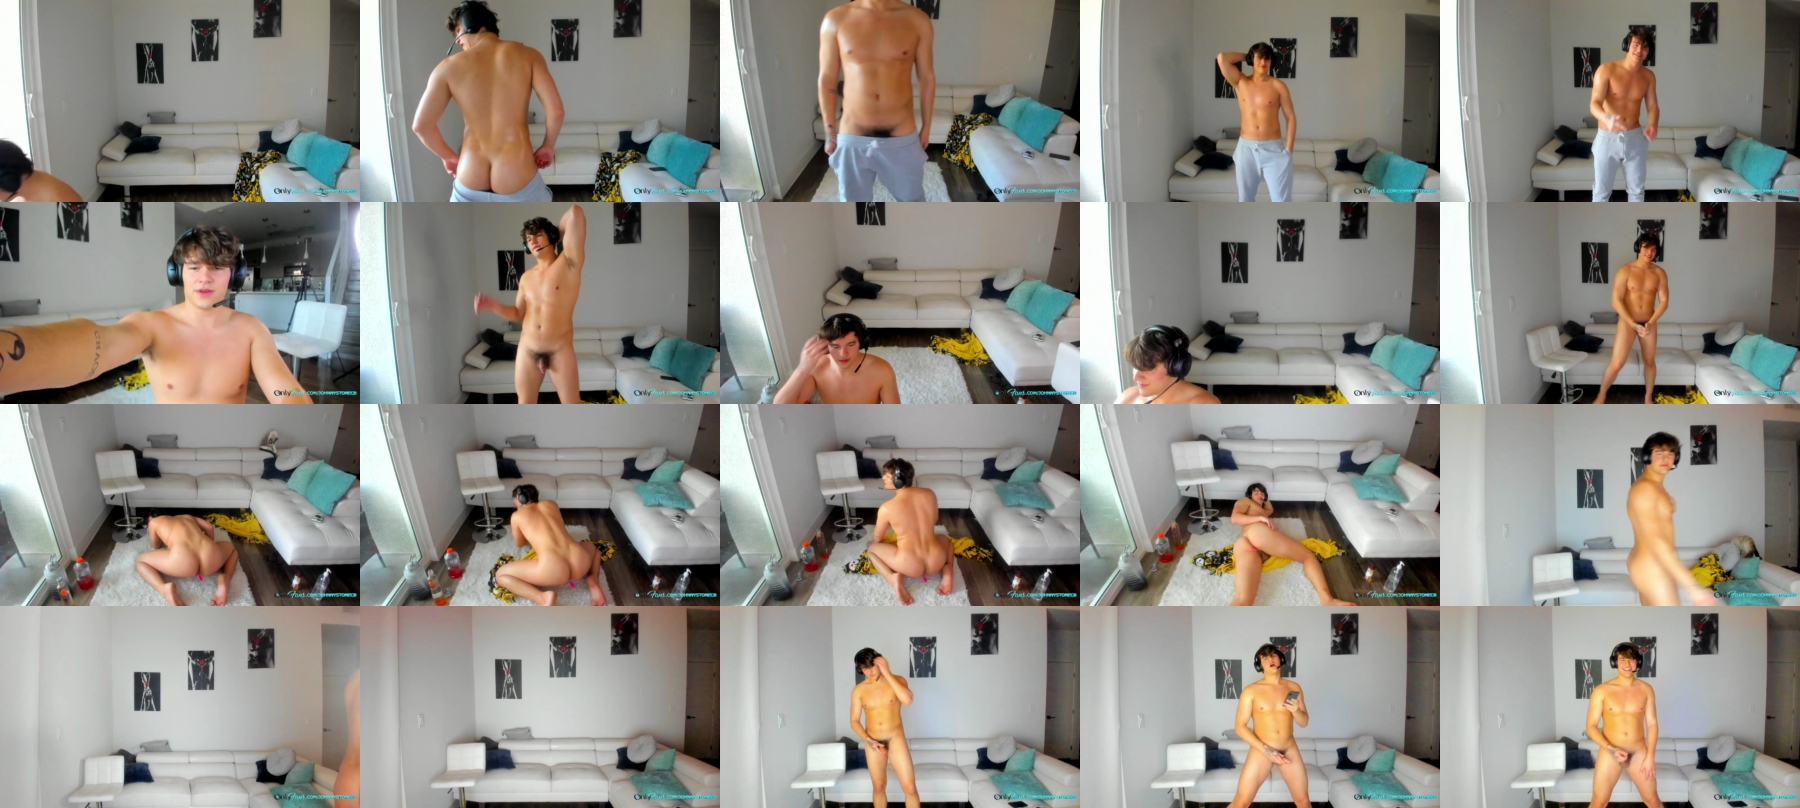 Thejohnnystone  26-08-2021 Male Video